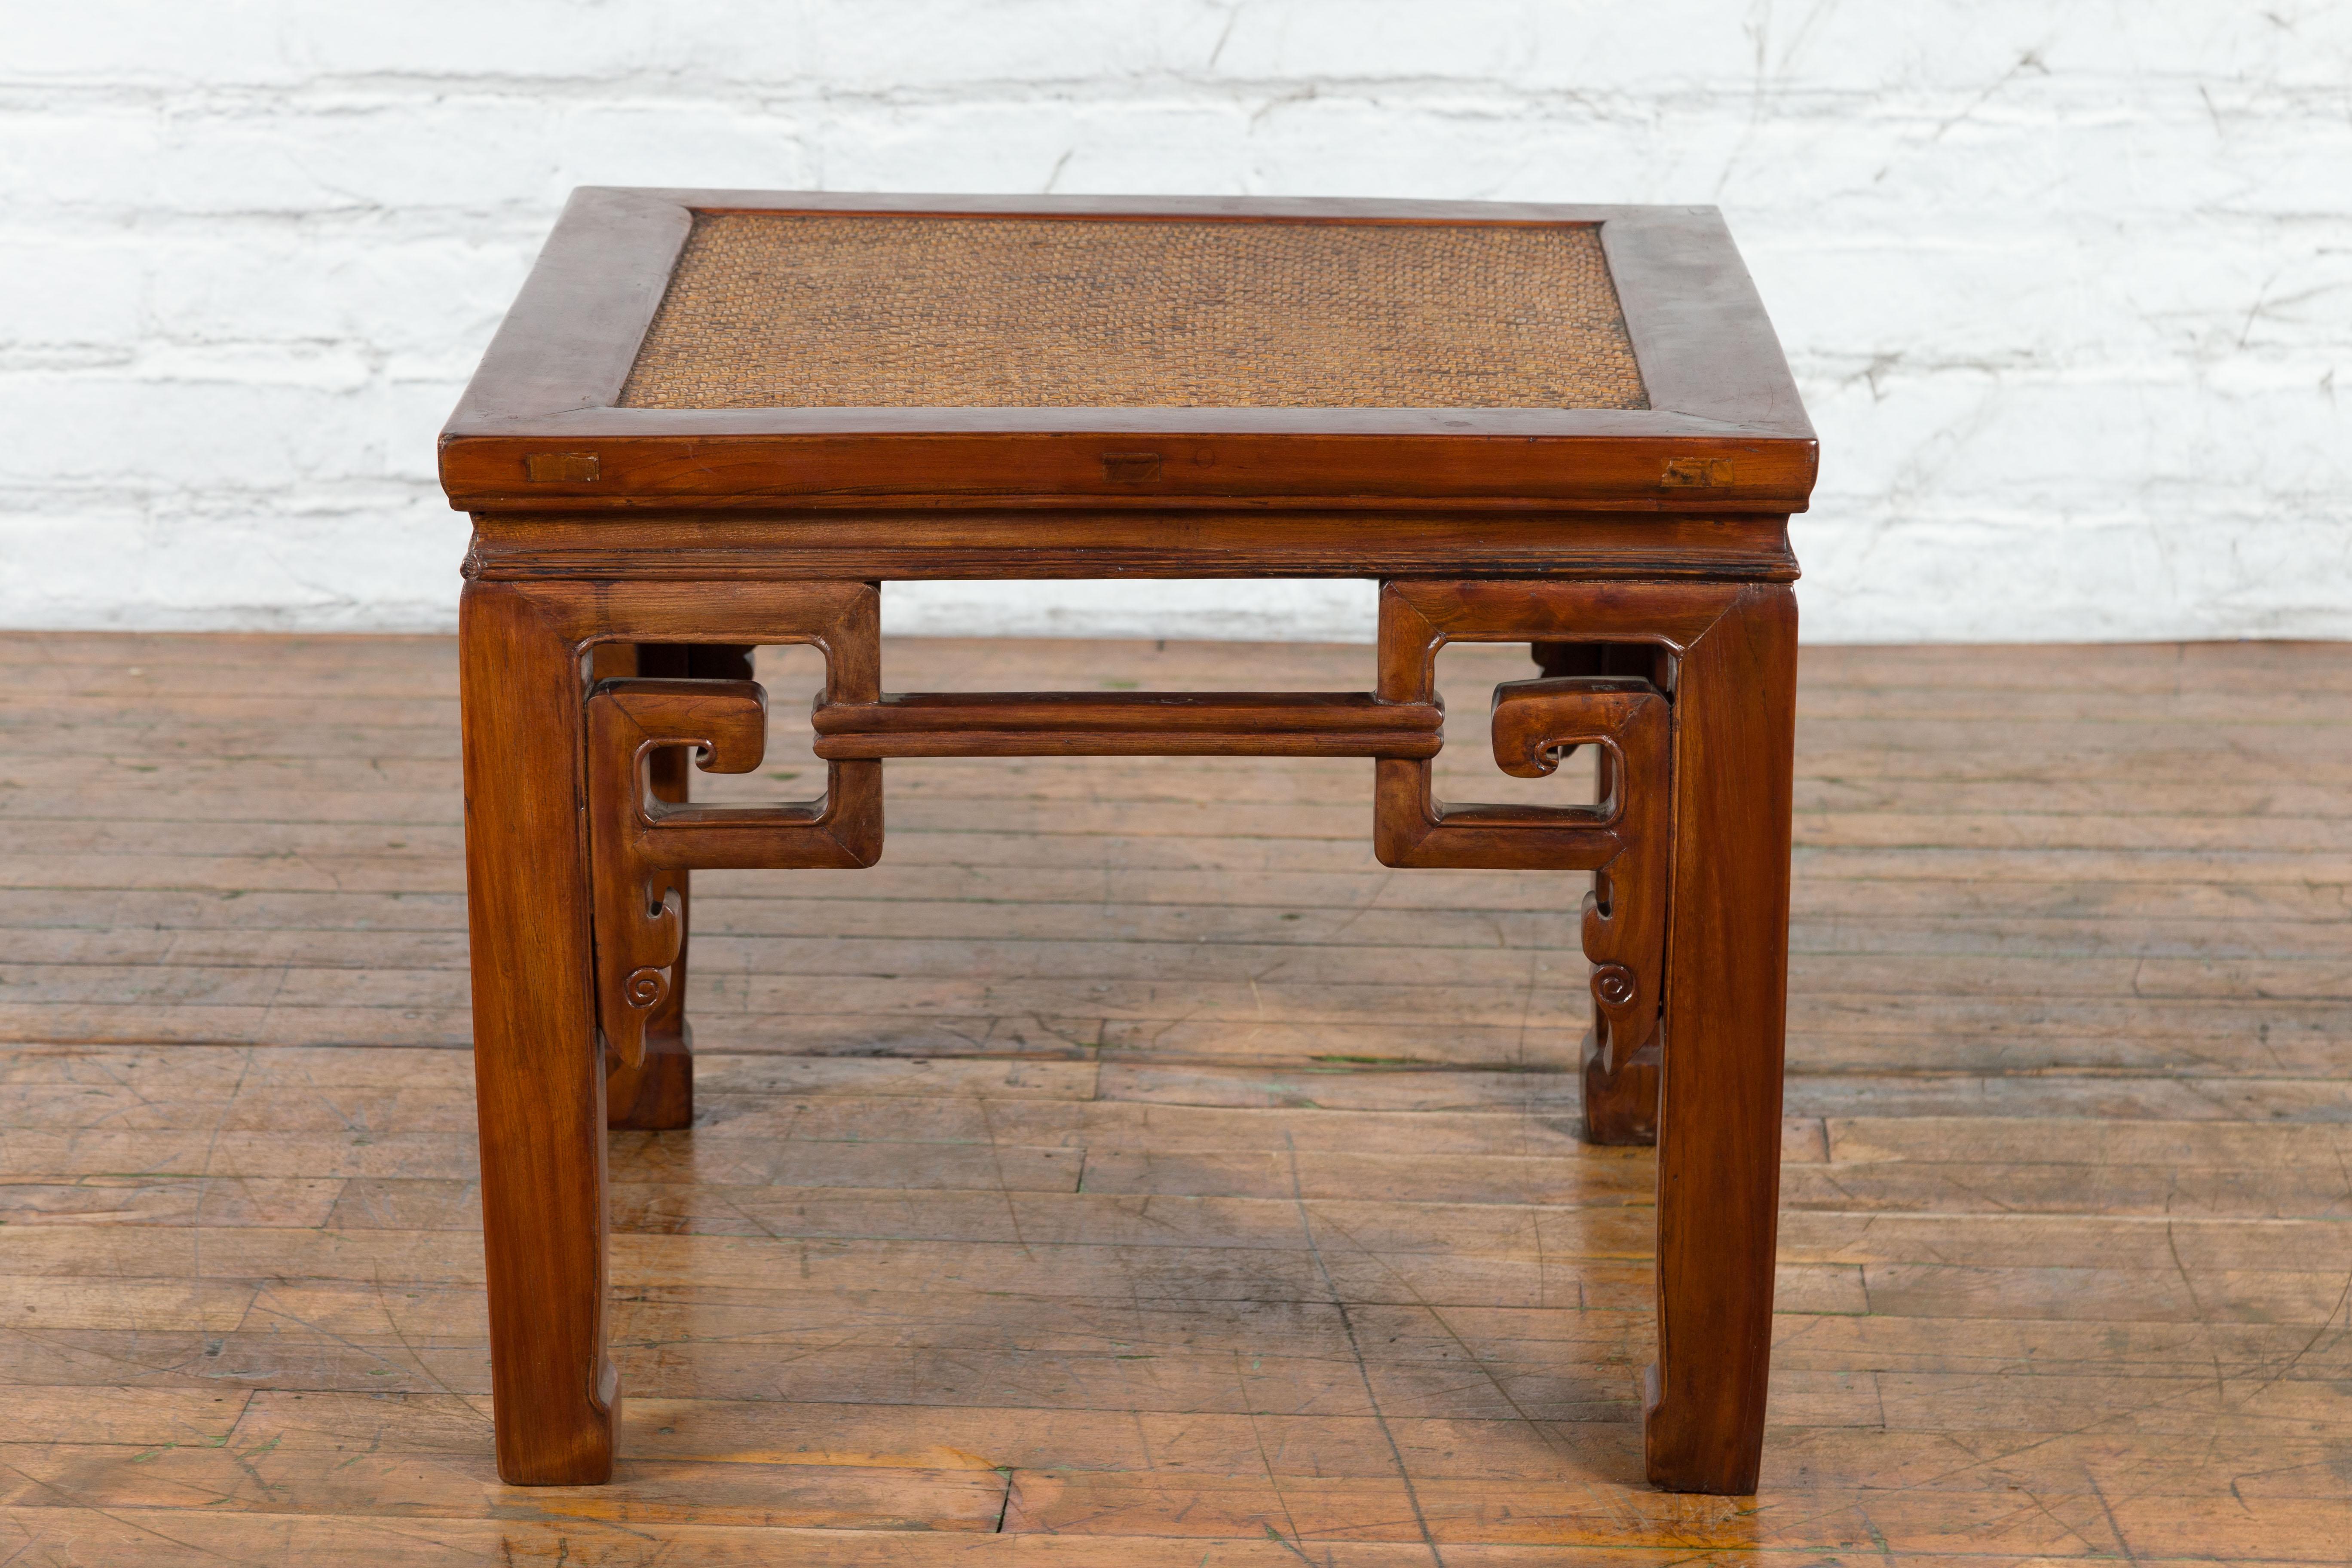 Chinese Qing Dynasty 19th Century Stool or Drinks Table with Woven Rattan Top For Sale 9